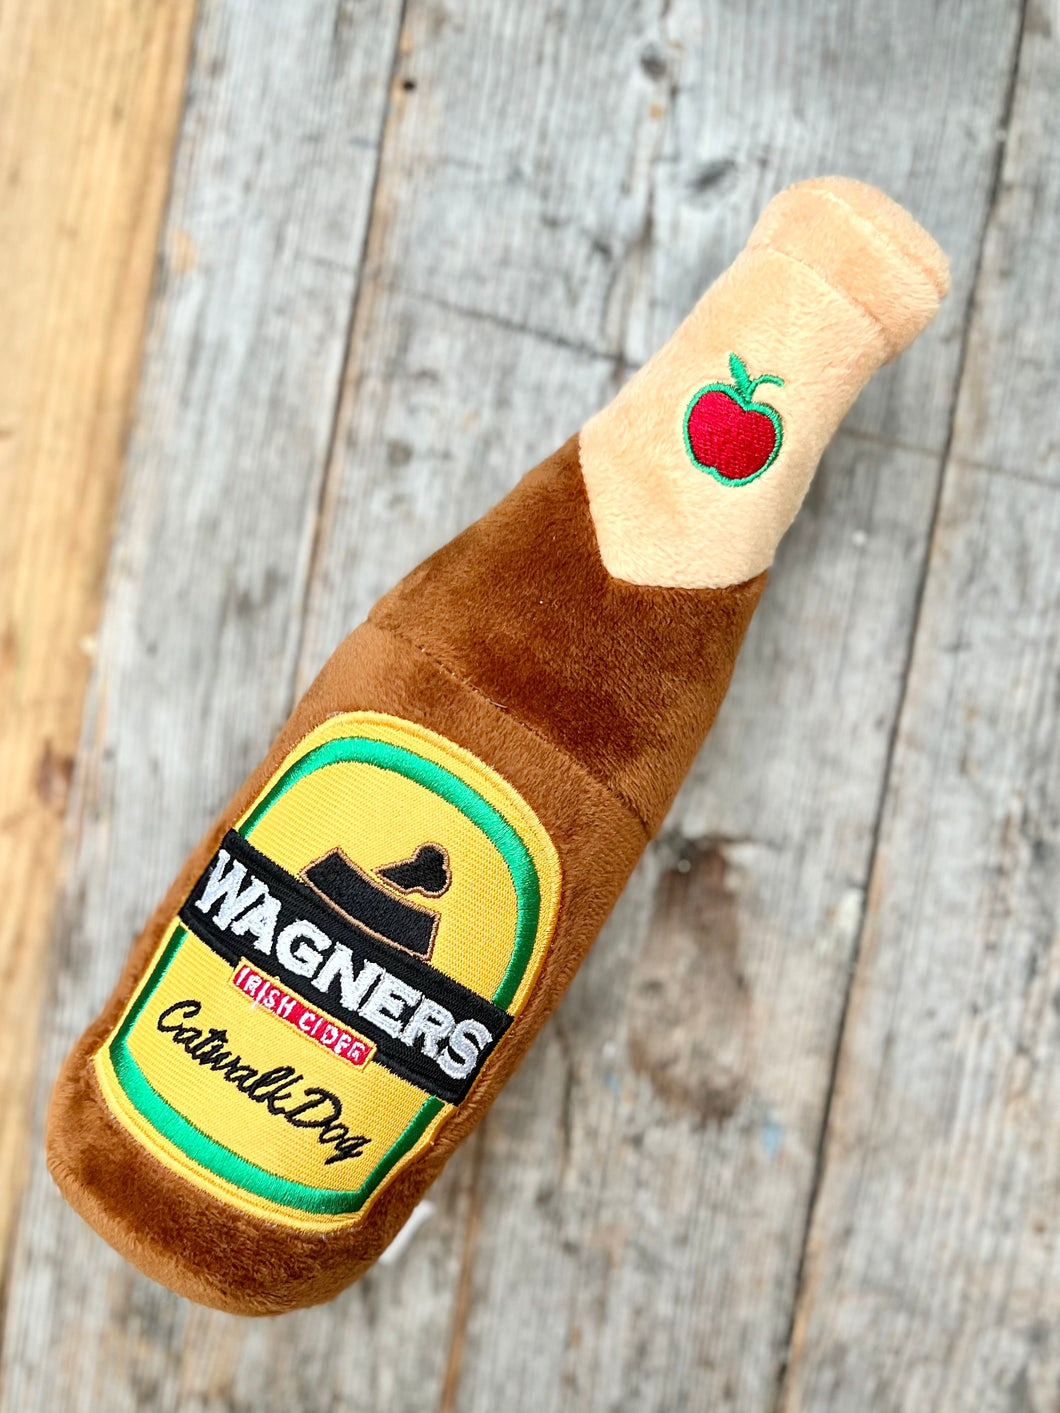 “Wagners cider” bottle plush toy